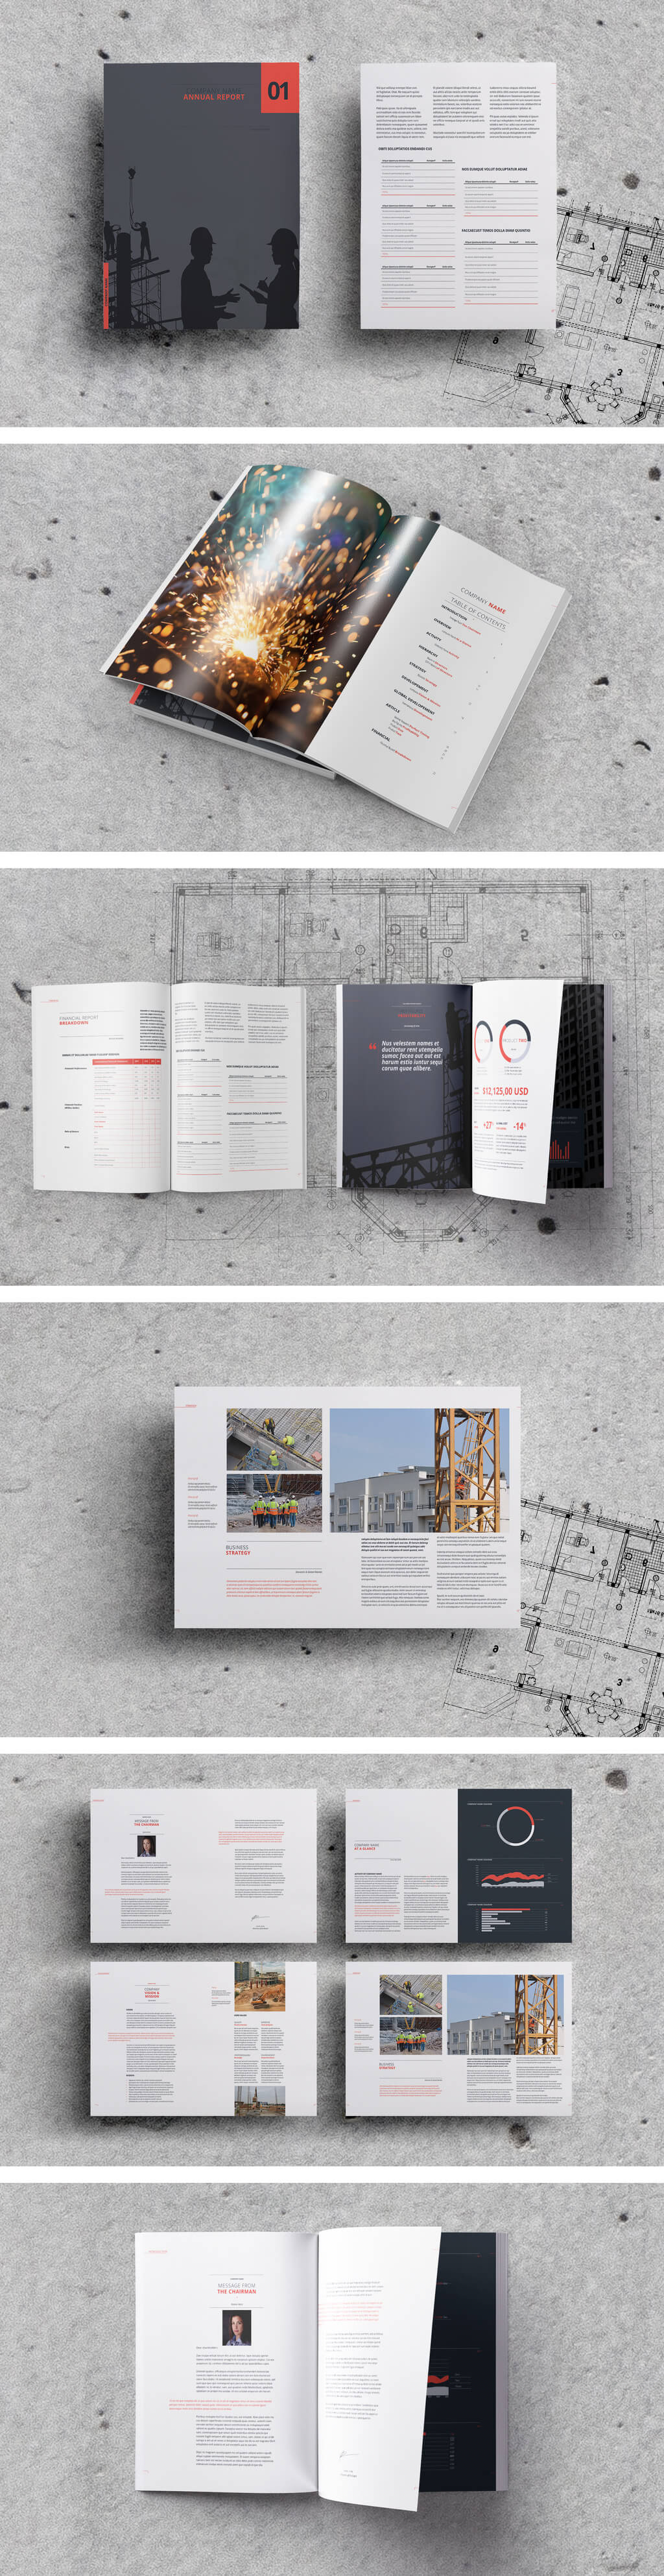 65 Fresh Indesign Templates And Where To Find More Within Free Annual Report Template Indesign